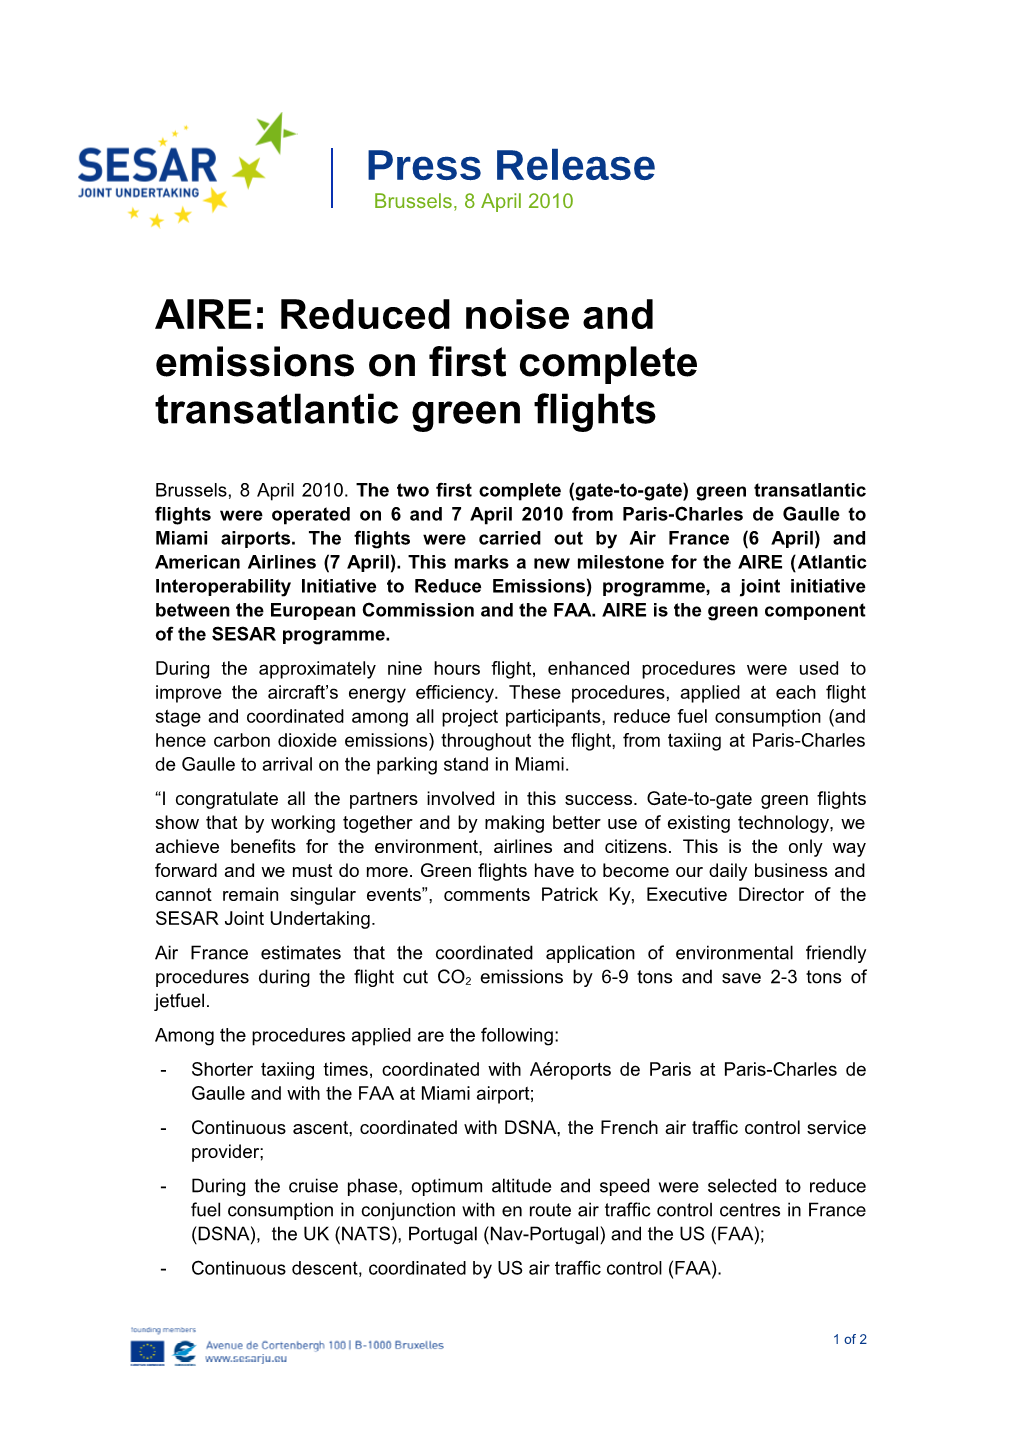 AIRE: Reduced Noise and Emissions on First Complete Transatlantic Green Flights